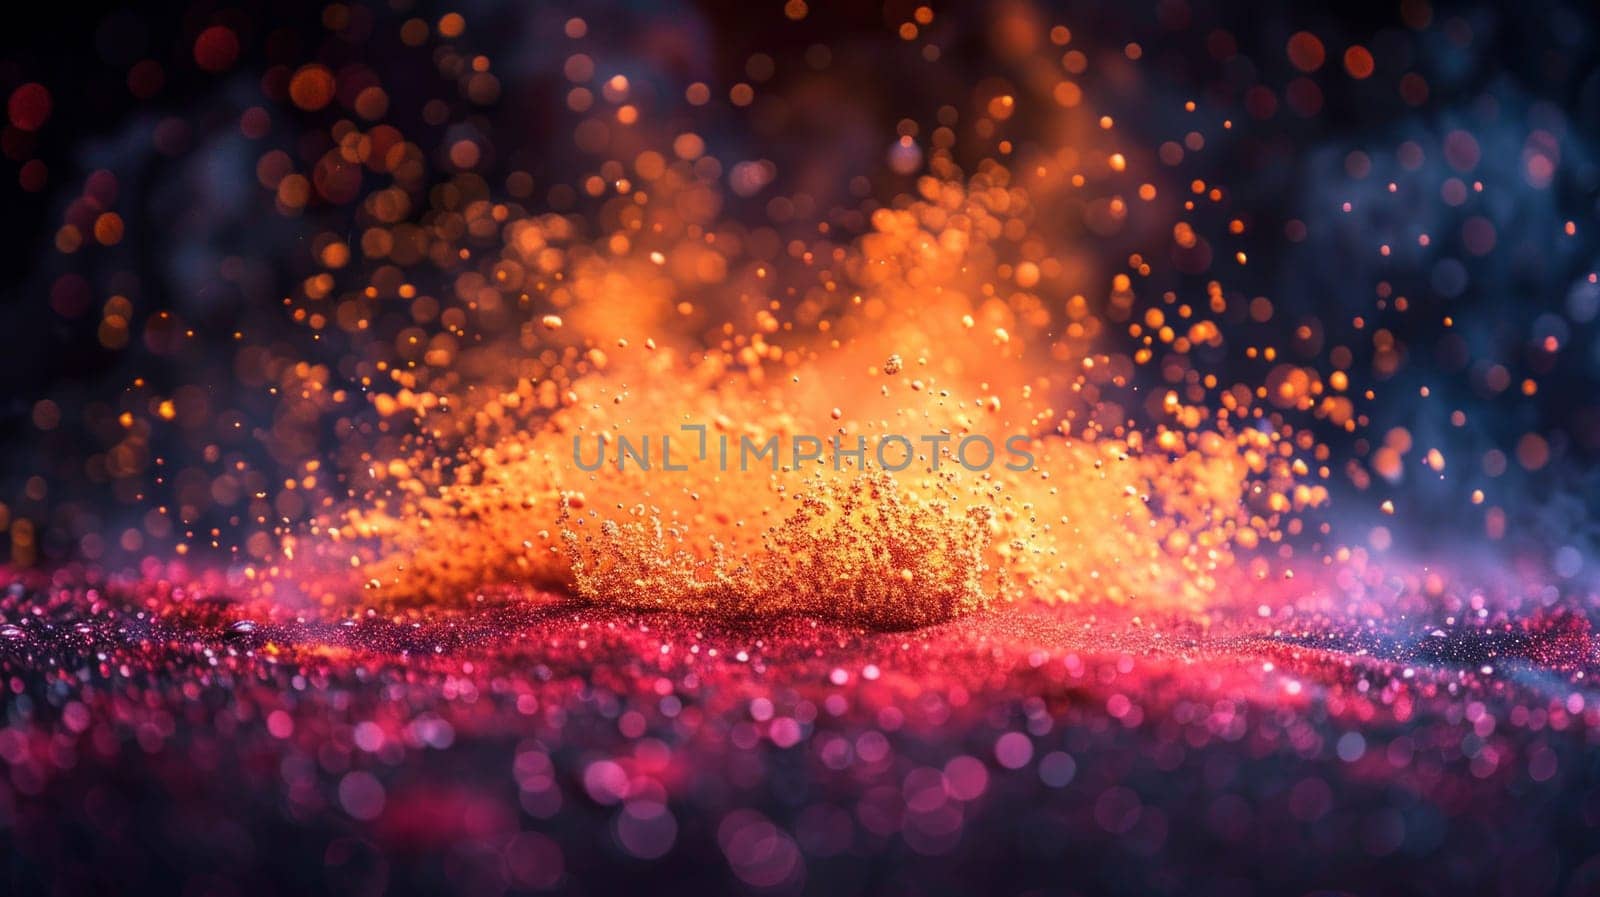 A vibrant explosion of bright yellow and red dust fills the scene, creating a dynamic and powerful visual display.